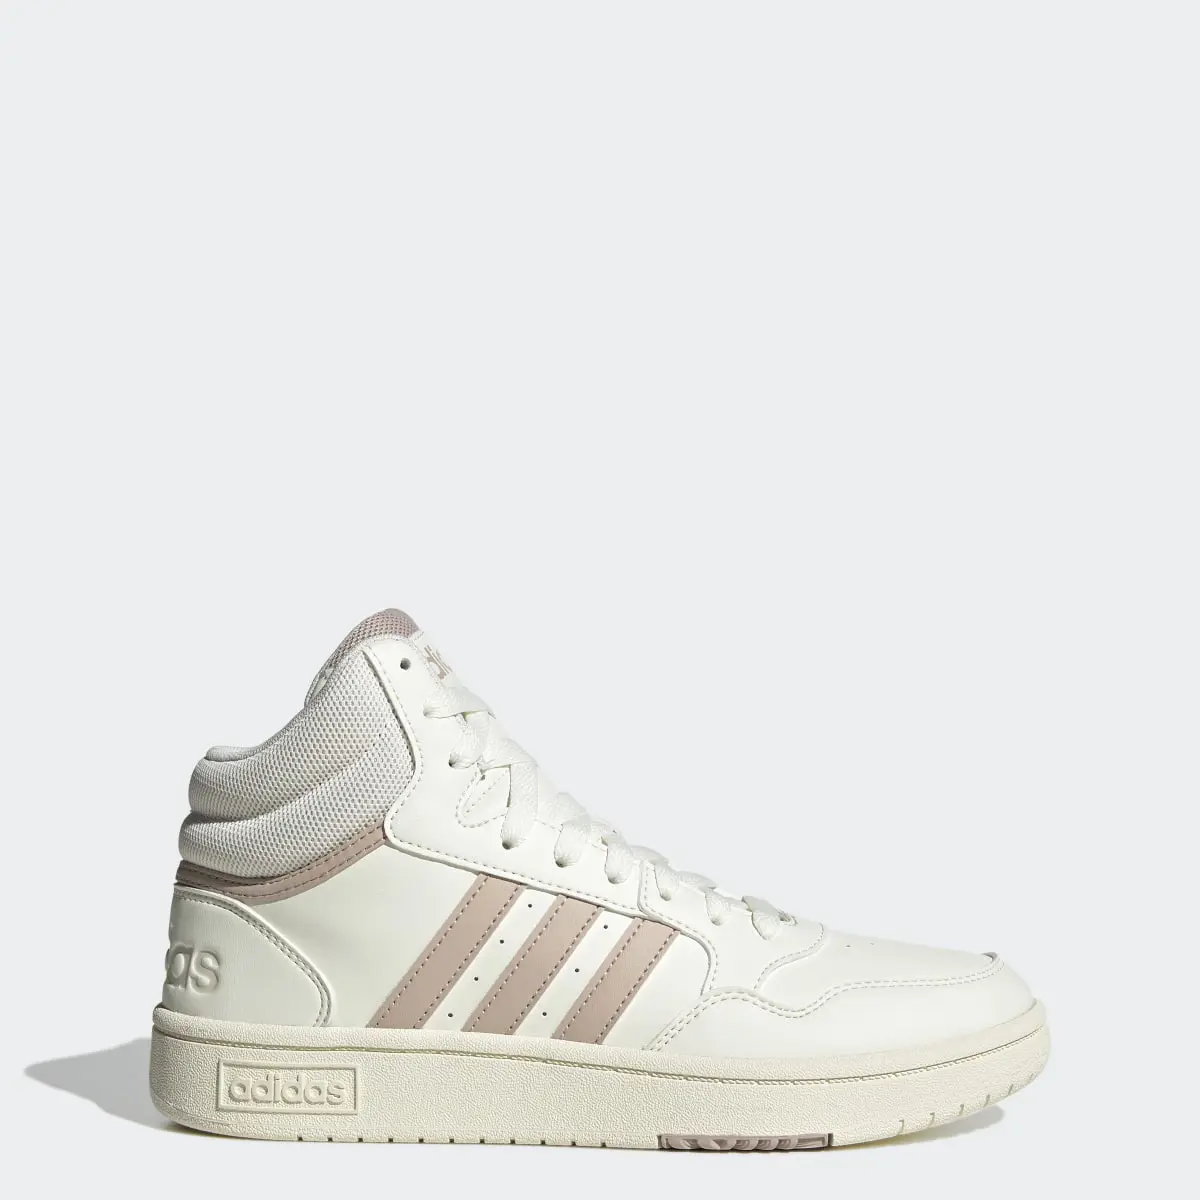 Adidas Hoops 3.0 Mid Classic Shoes. 1